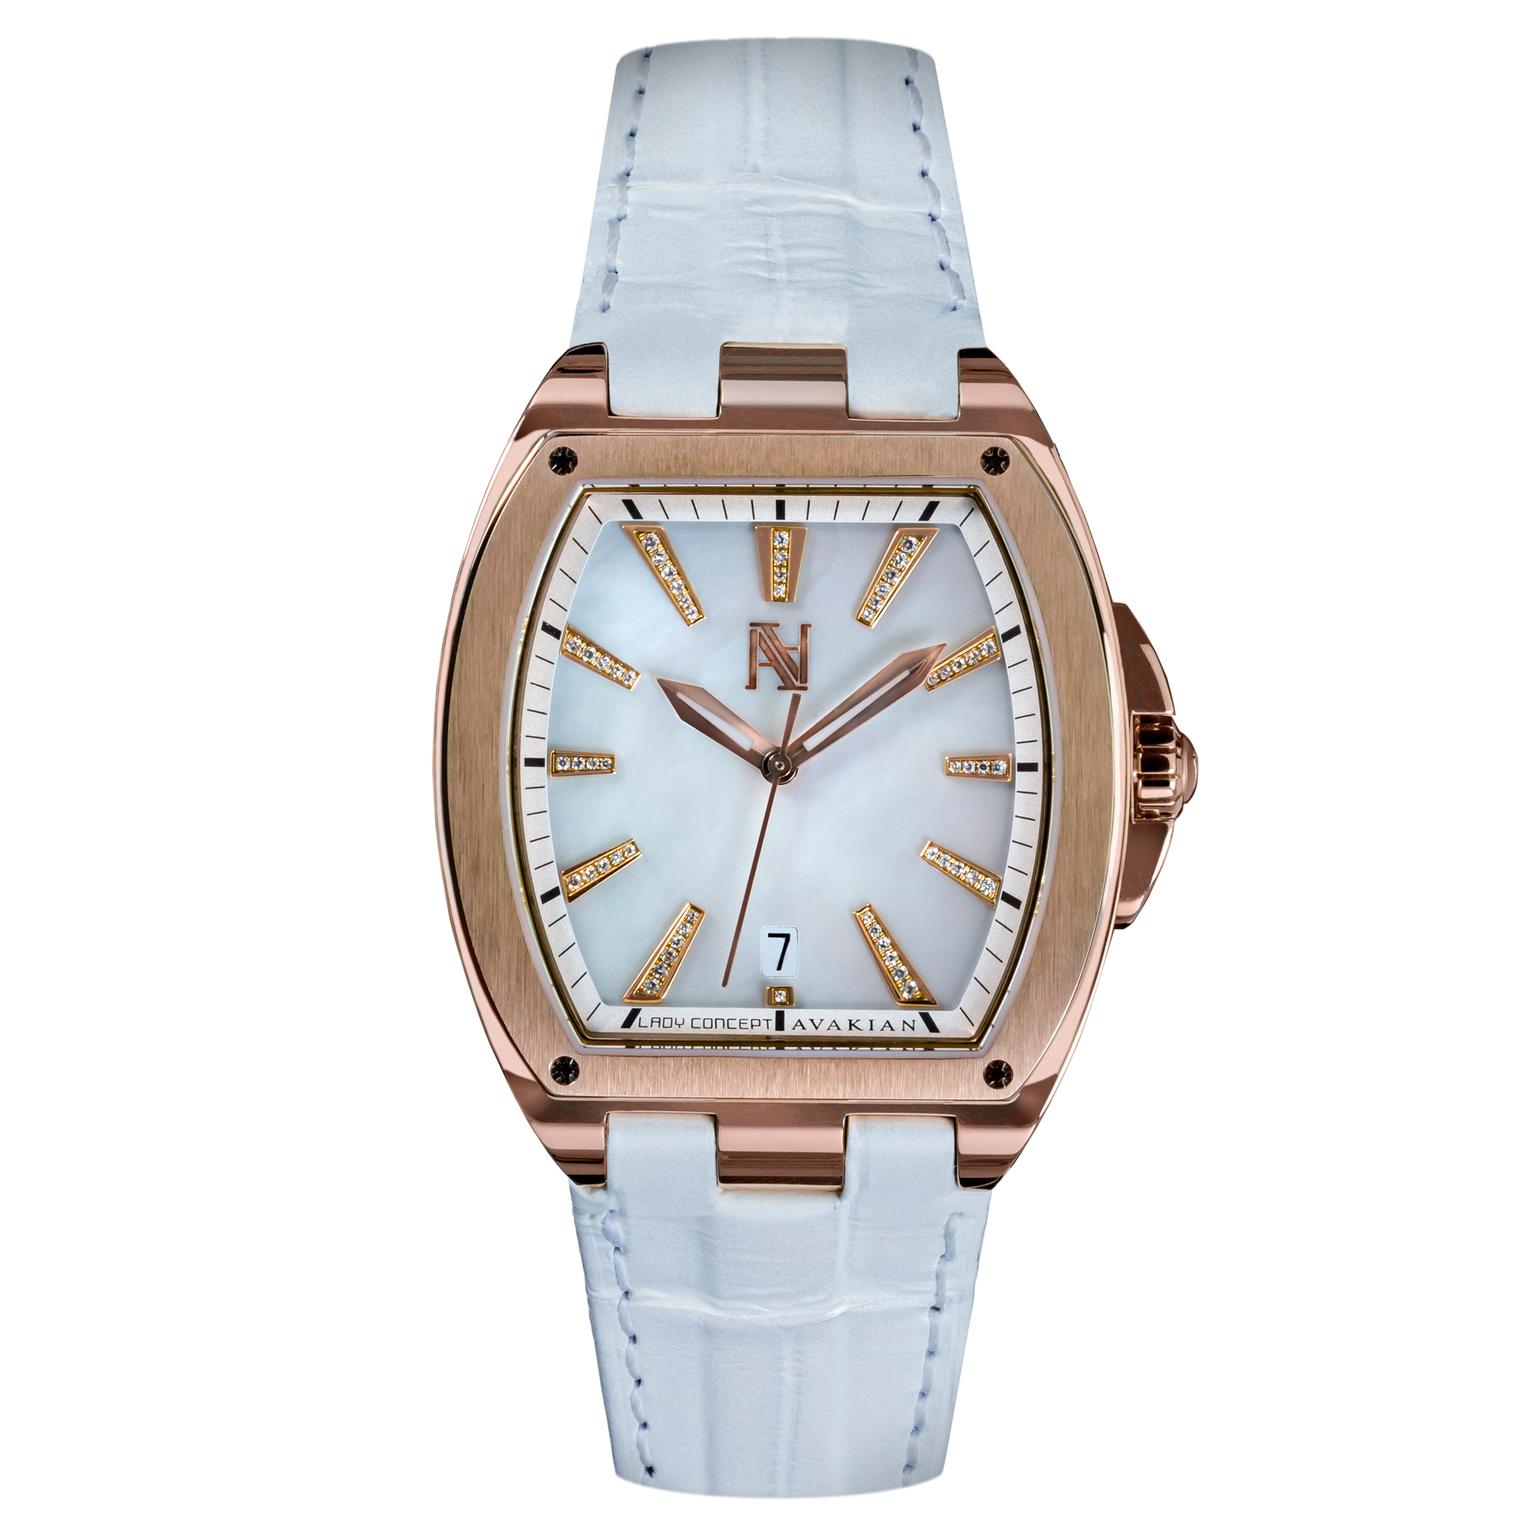 Avakian Lady Concept white watch